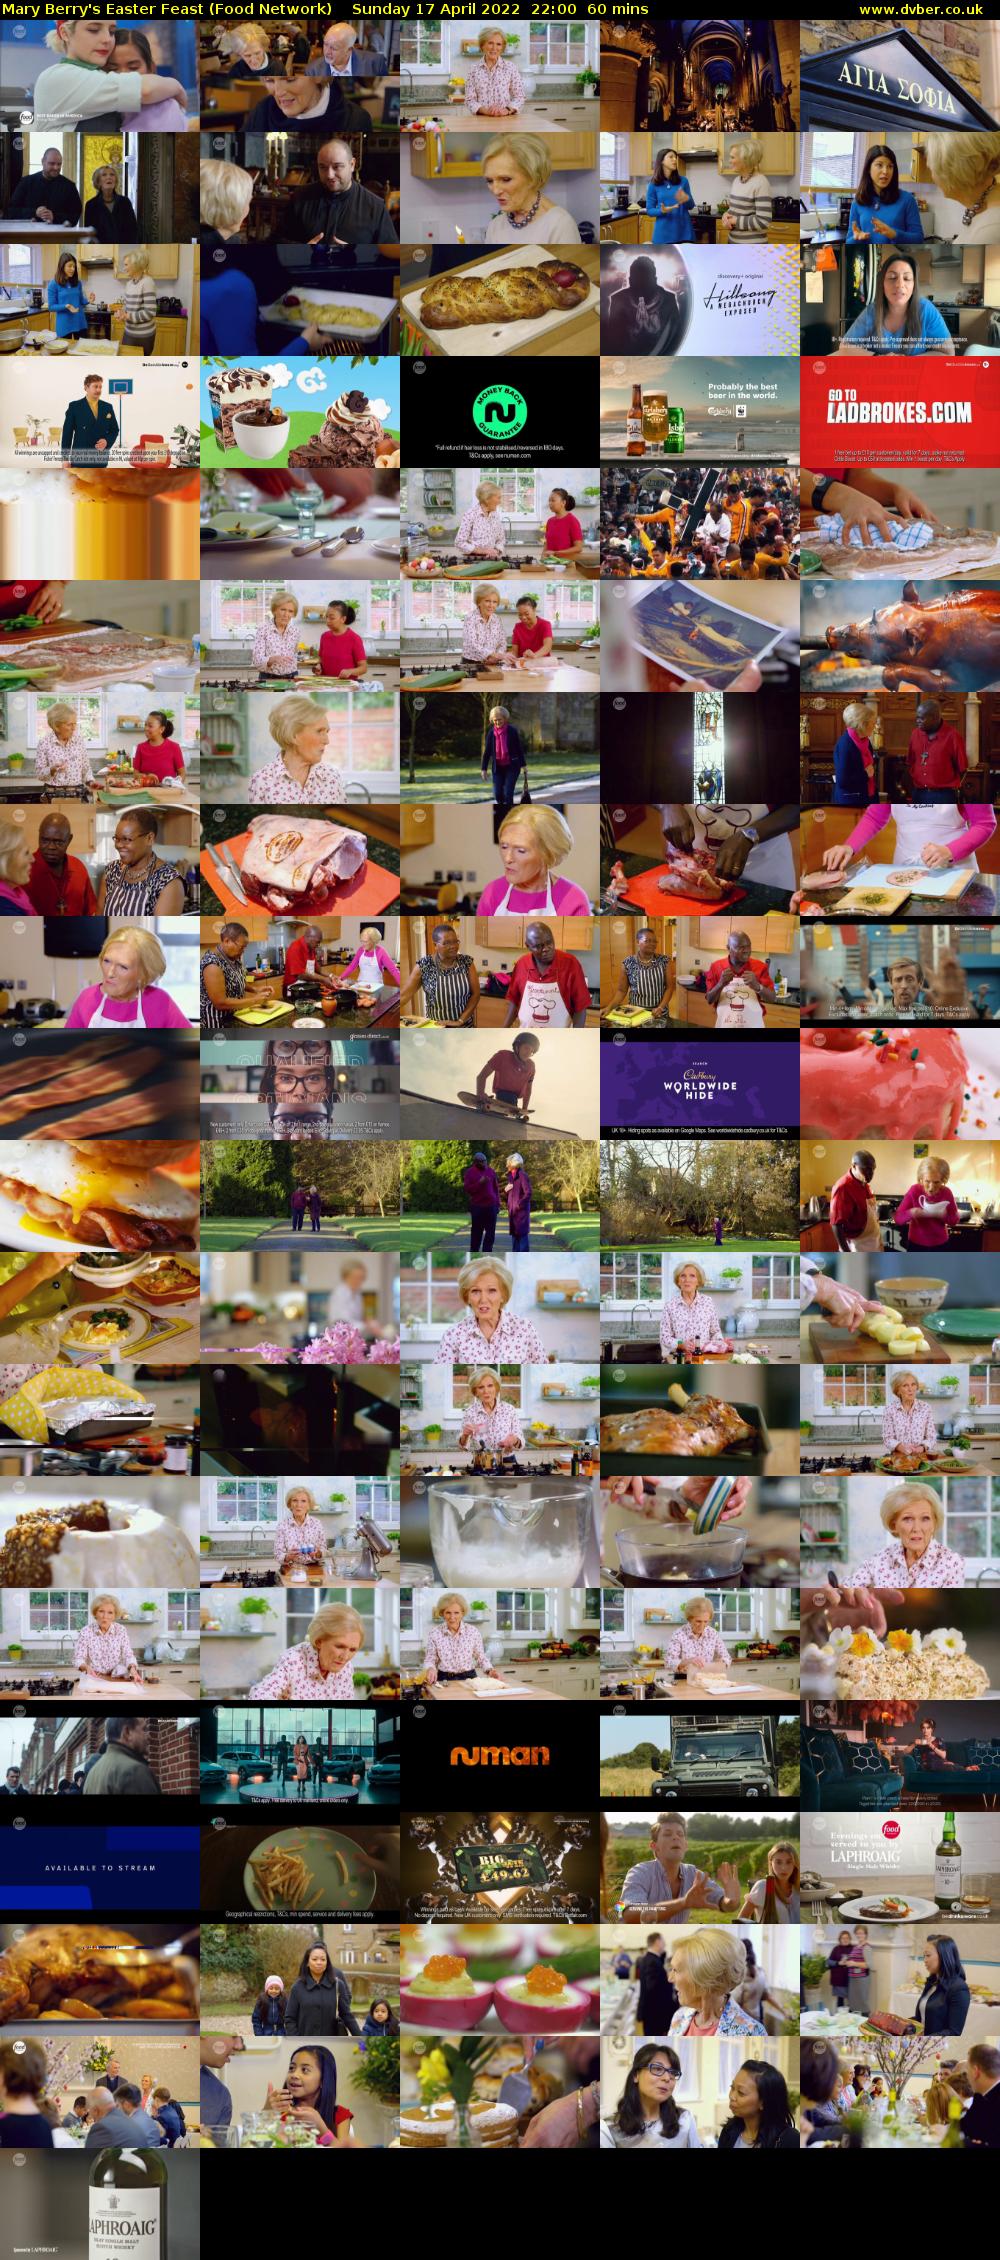 Mary Berry's Easter Feast (Food Network) Sunday 17 April 2022 22:00 - 23:00